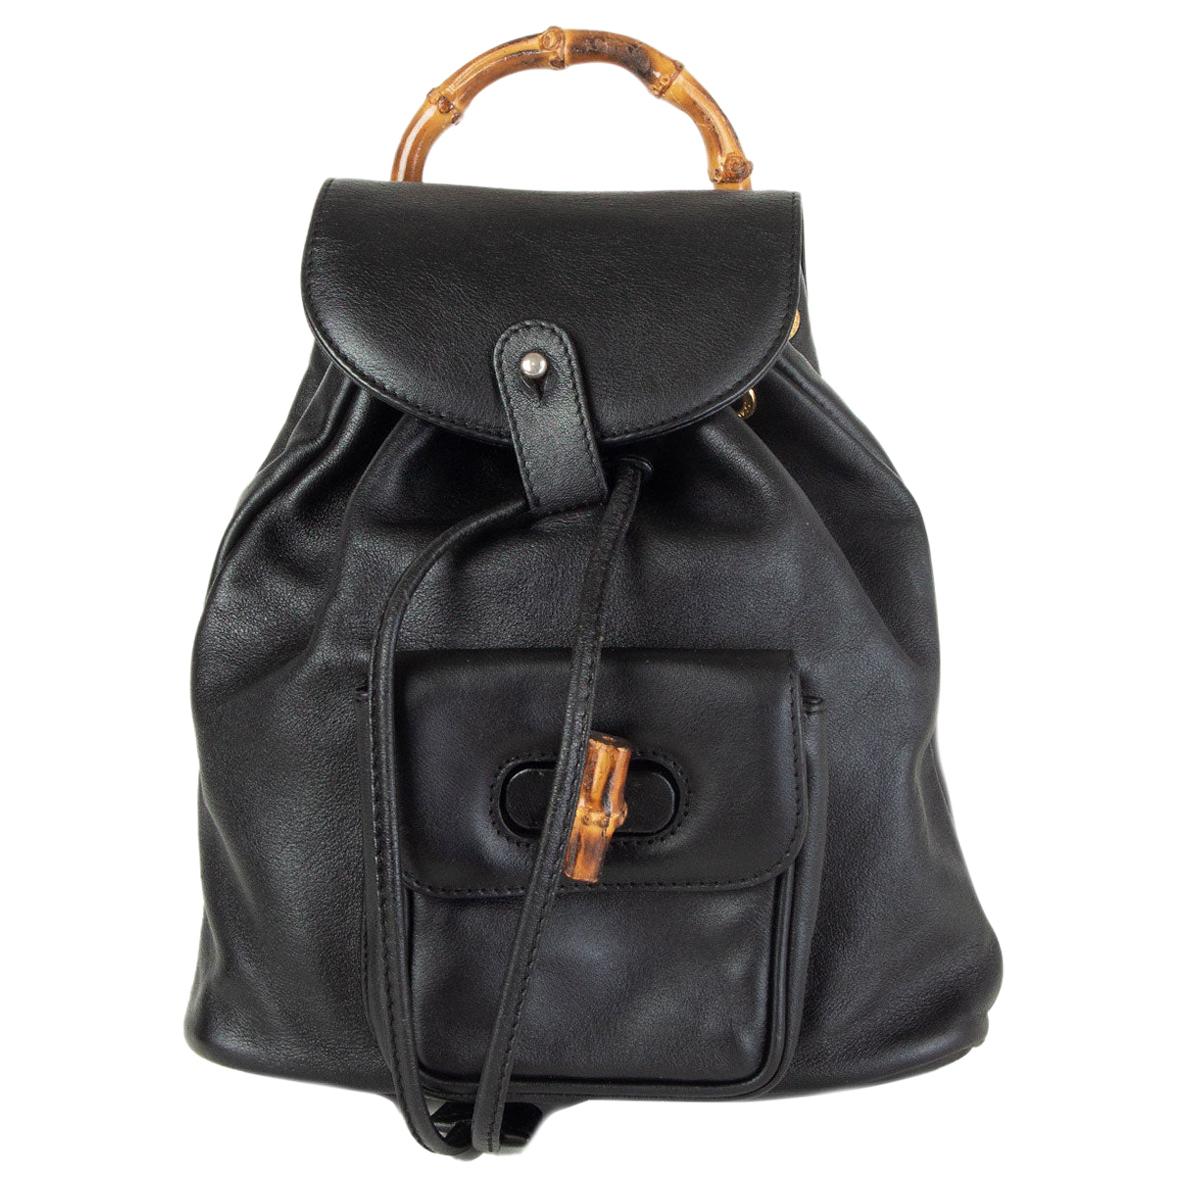 Gucci Vintage Bamboo Backpack Leather Mini At 1stdibs Gucci Bamboo 